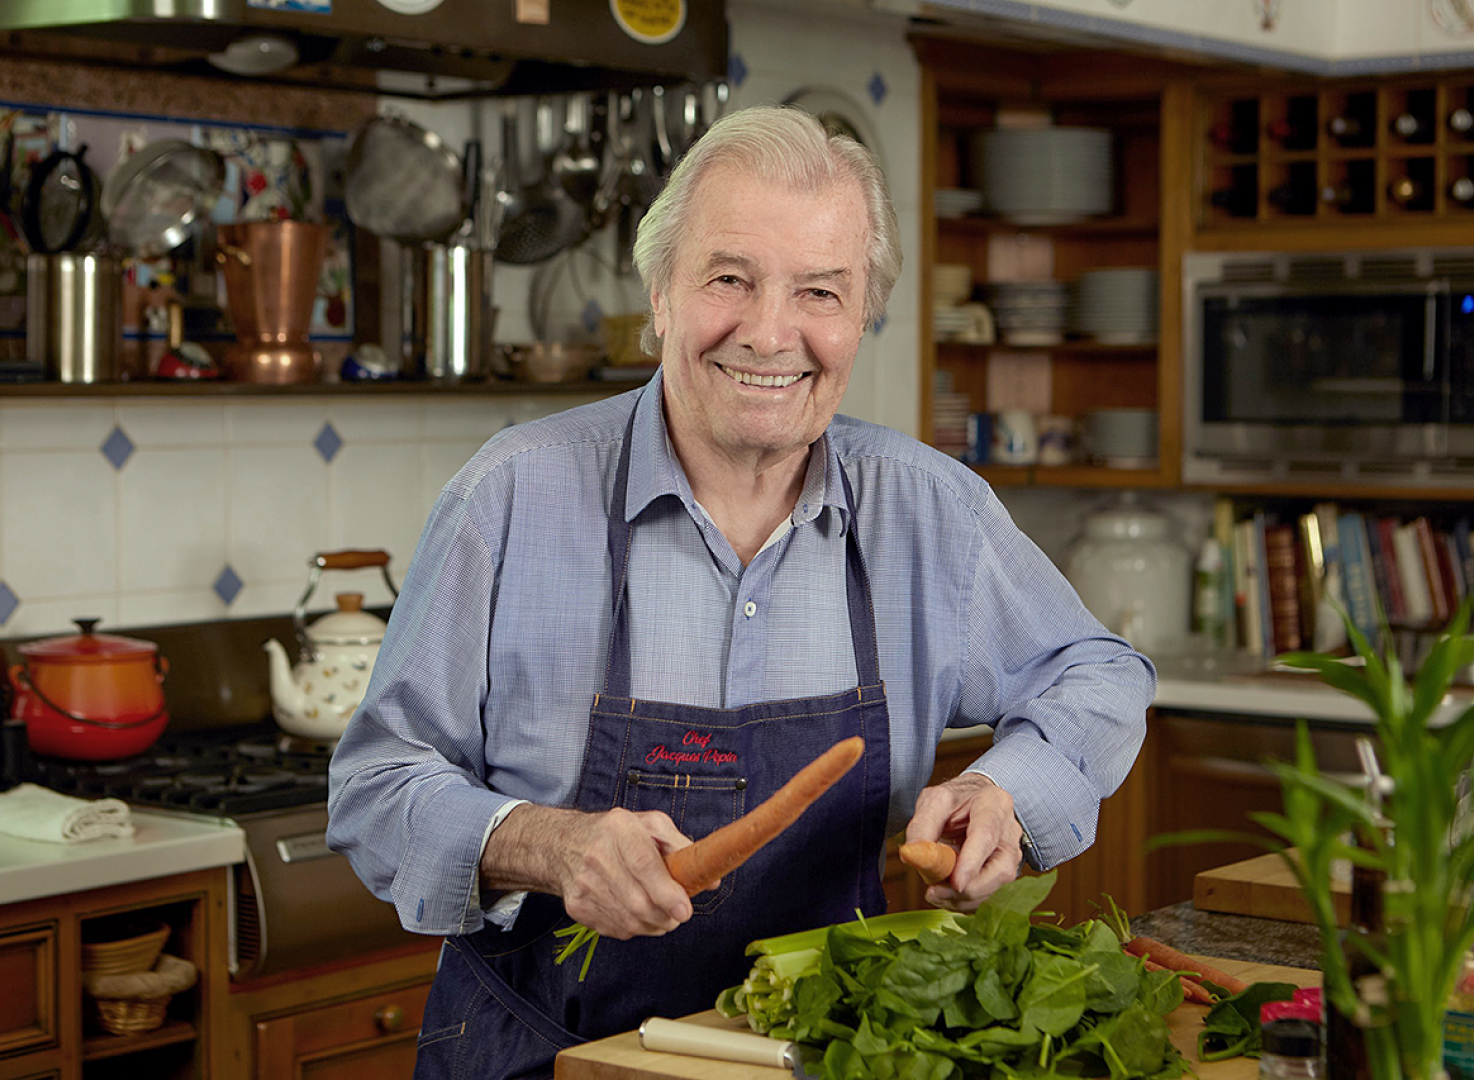 Jacques Pepin cooking in his home kitchen